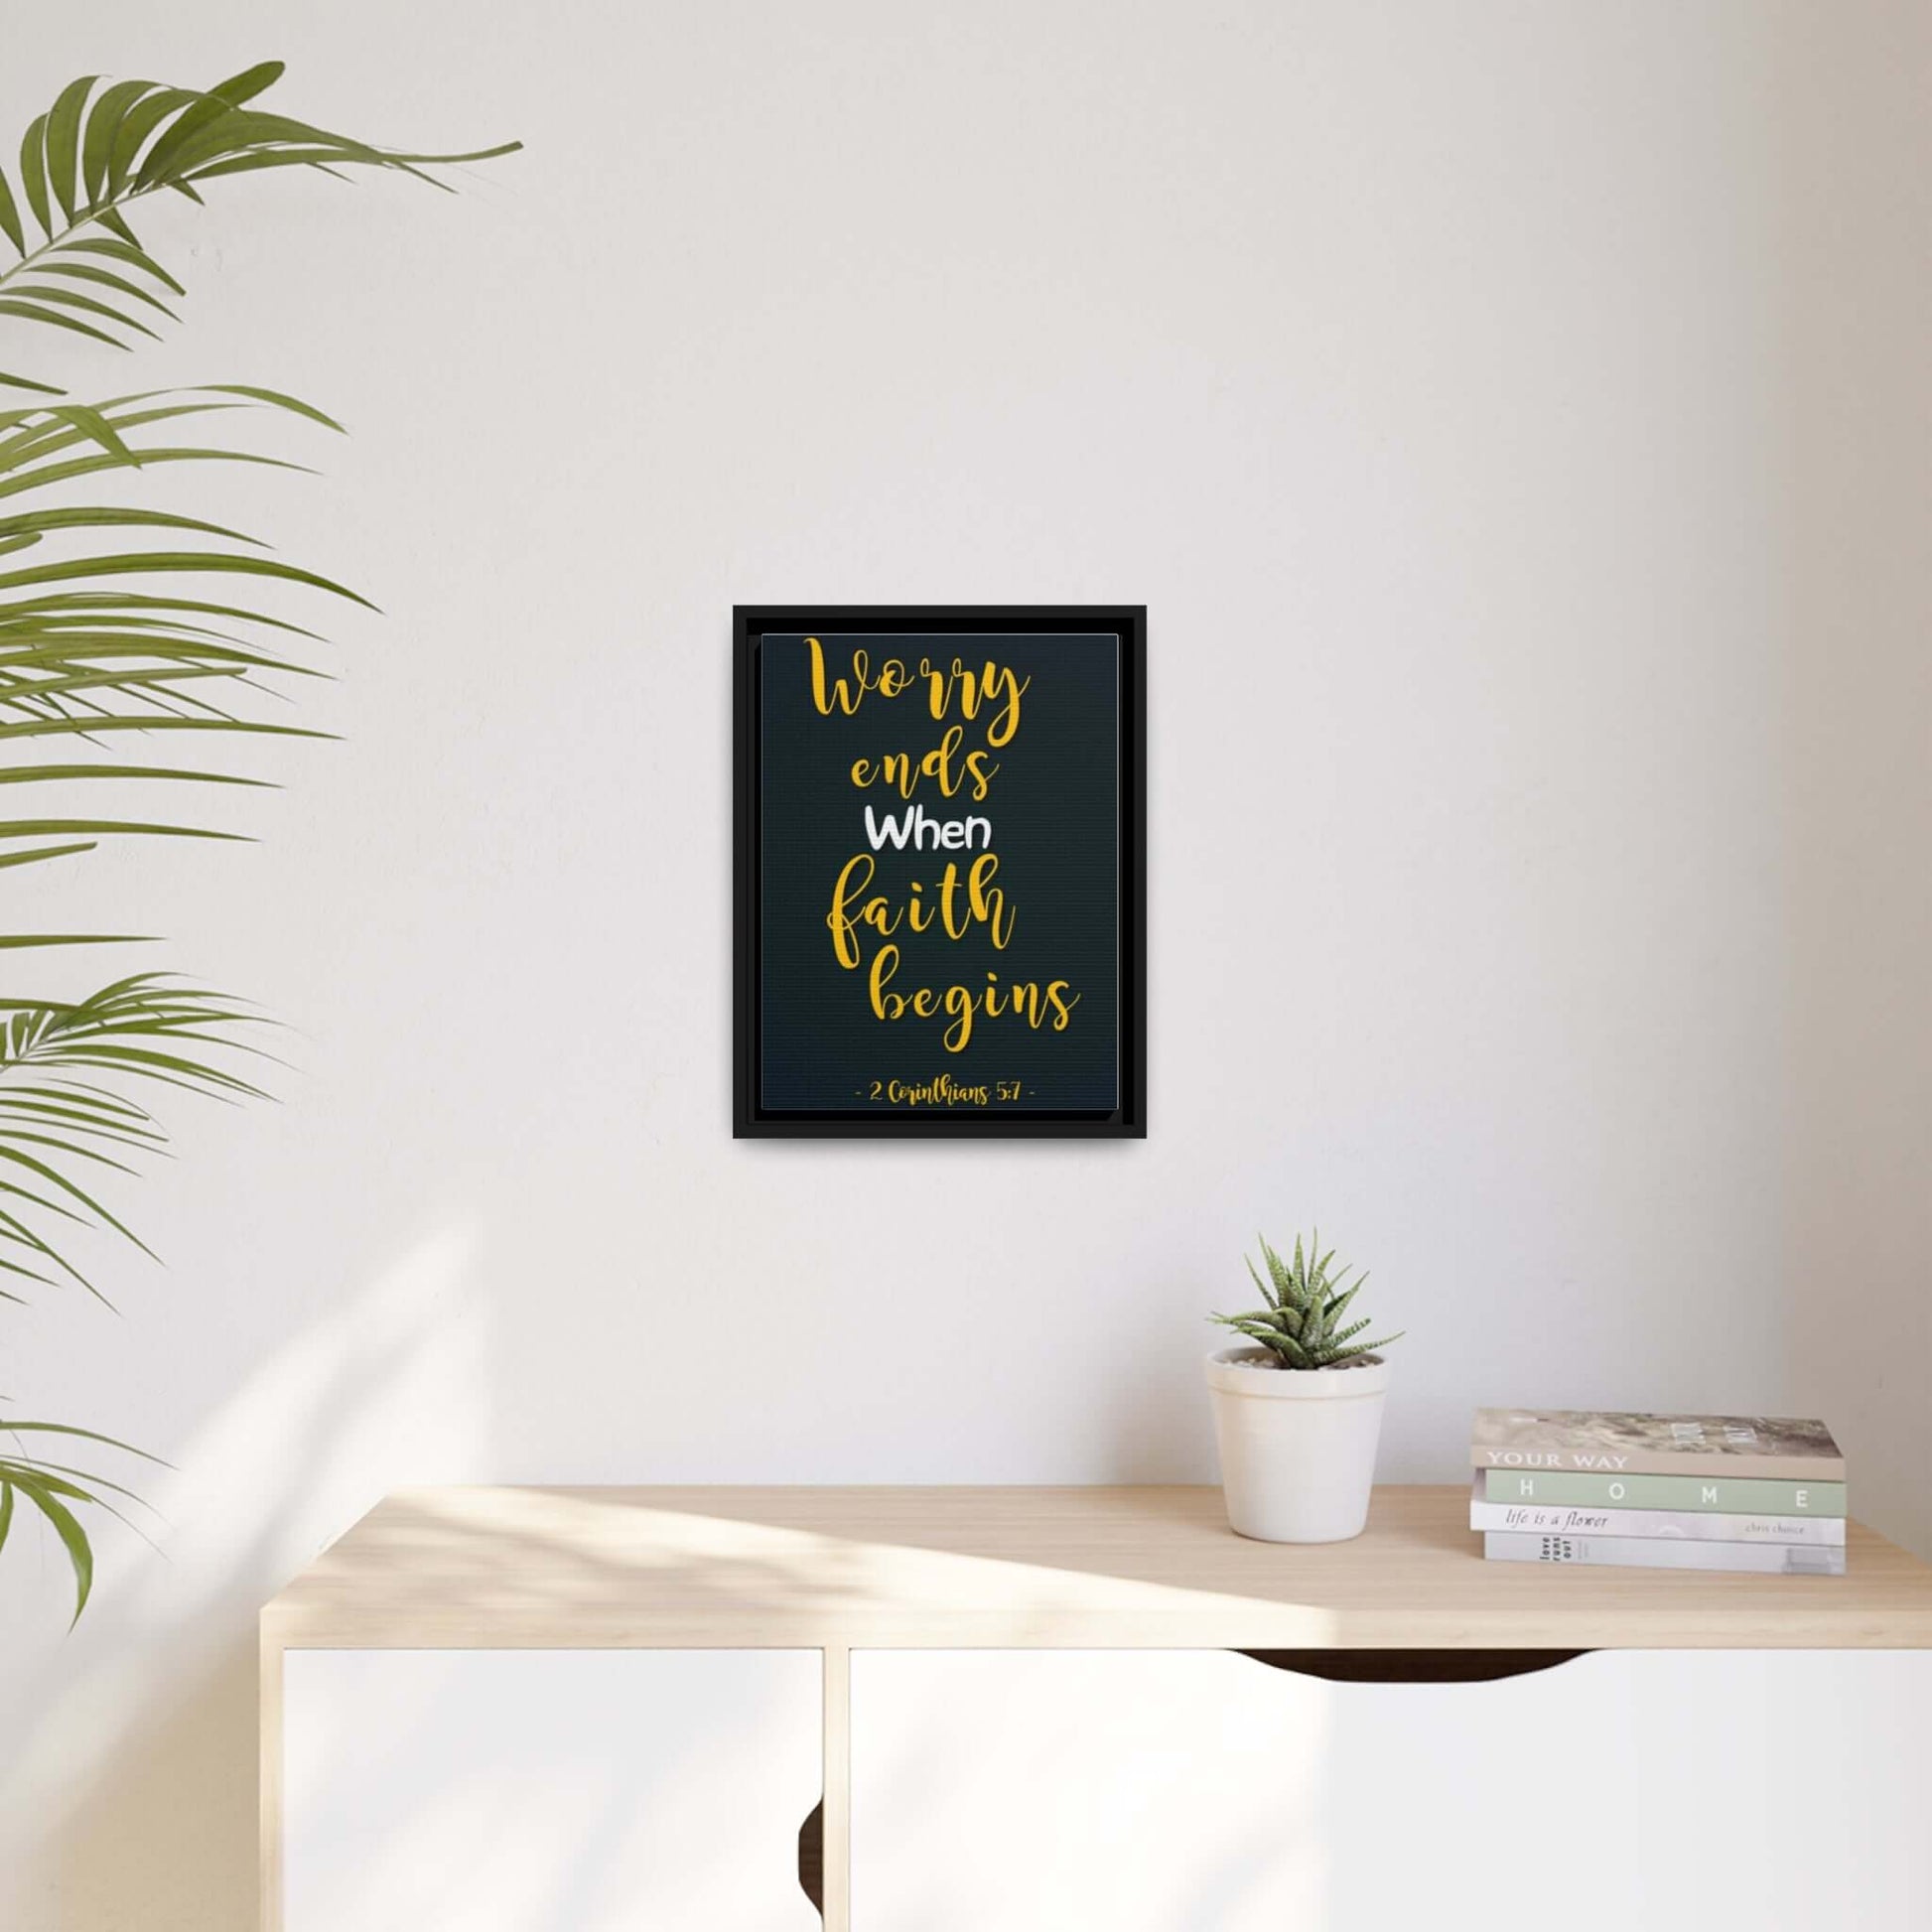 Elegant Wood Framed Canvas with Bible Verse - Multiple Sizes | Art & Wall Decor,Canvas,Decor,Eco-friendly,Framed,Hanging Hardware,Home & Living,Summer Picks,Sustainable